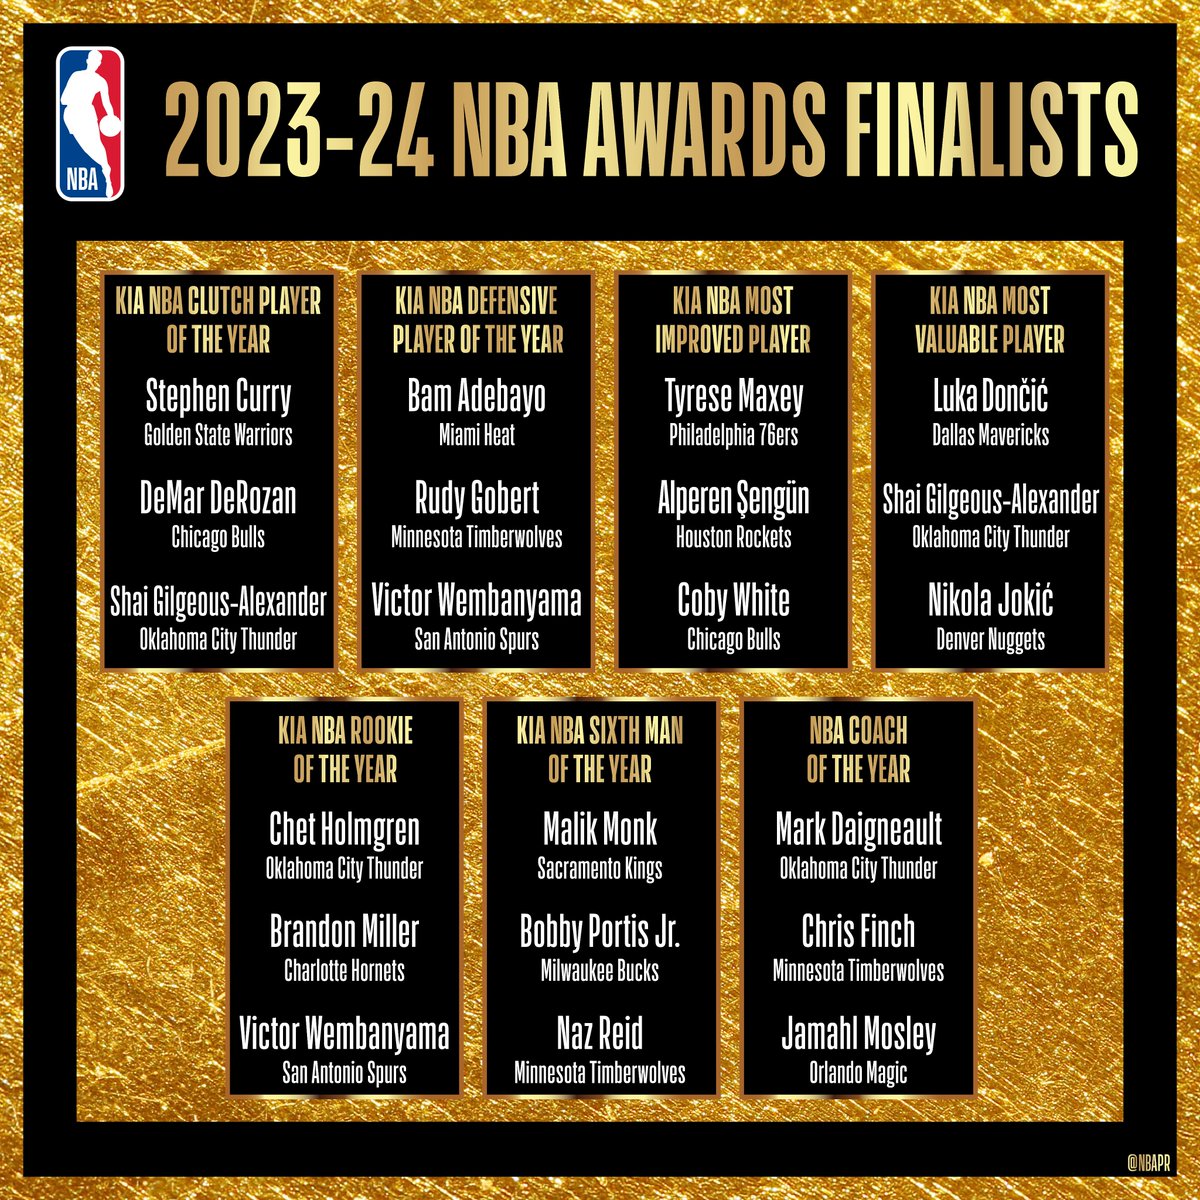 Complete list of 2023-24 awards finalists